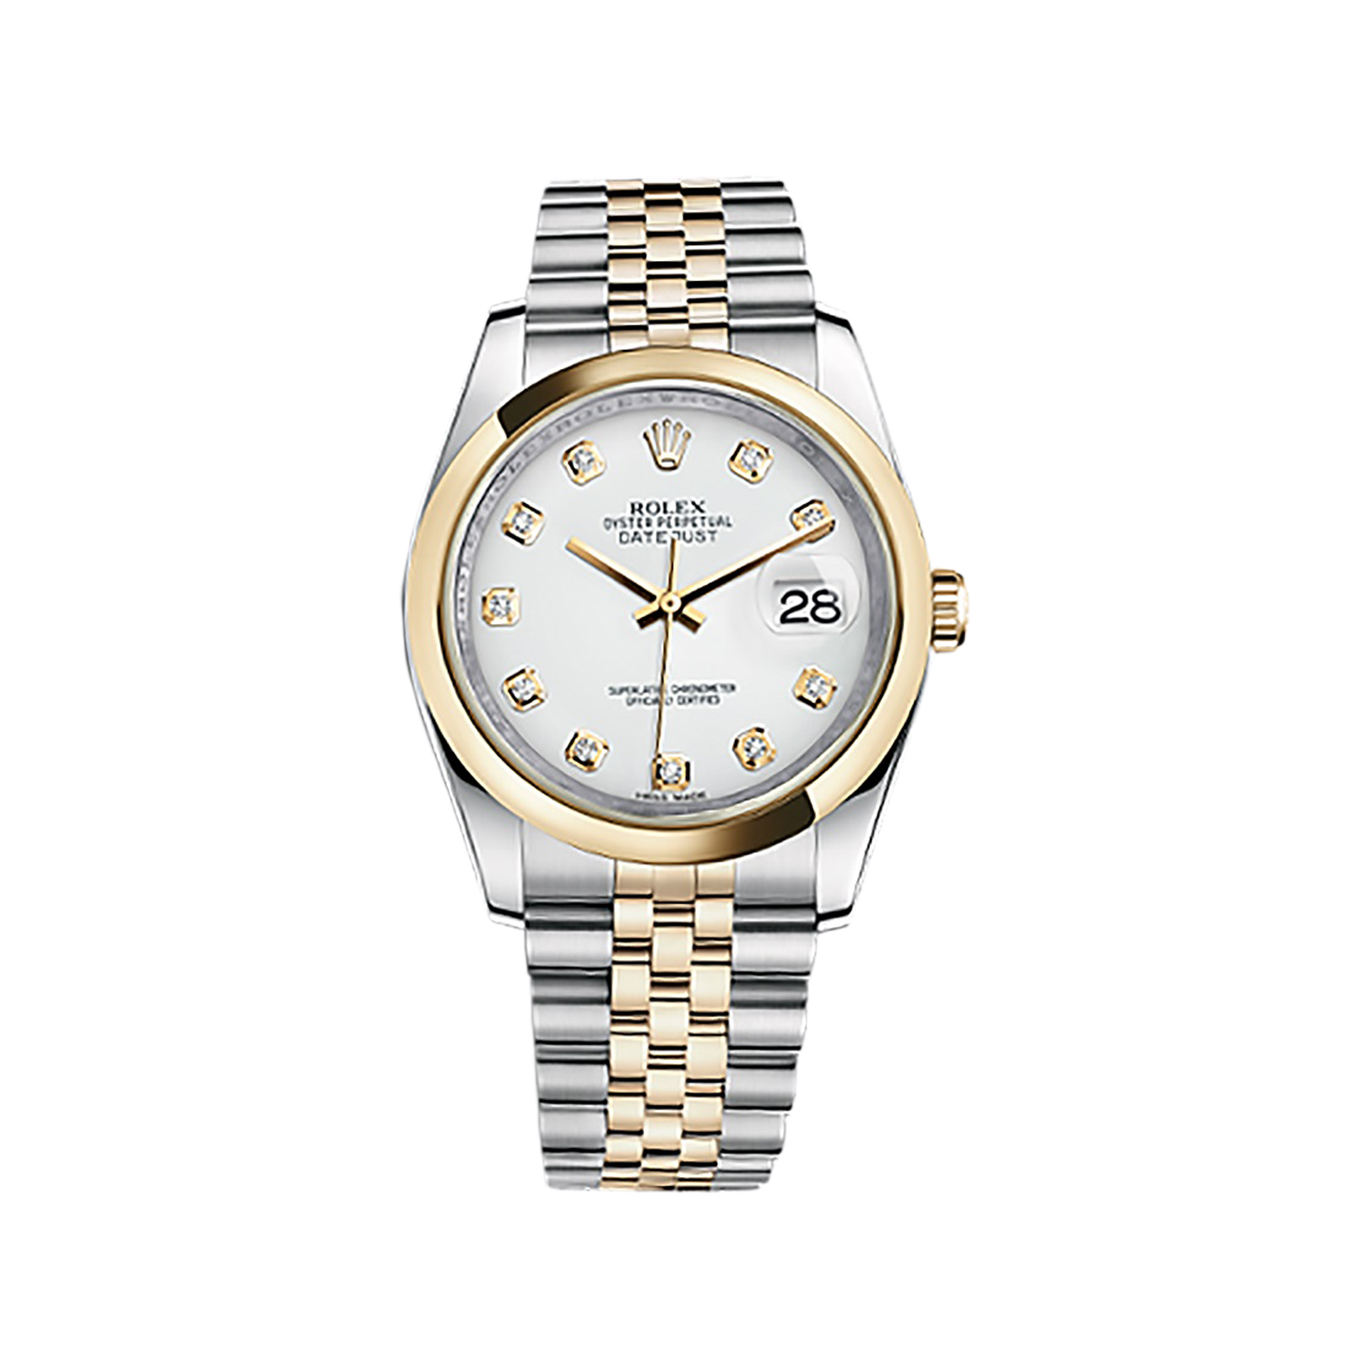 Datejust 36 116203 Gold & Stainless Steel Watch (White Set with Diamonds) - Click Image to Close